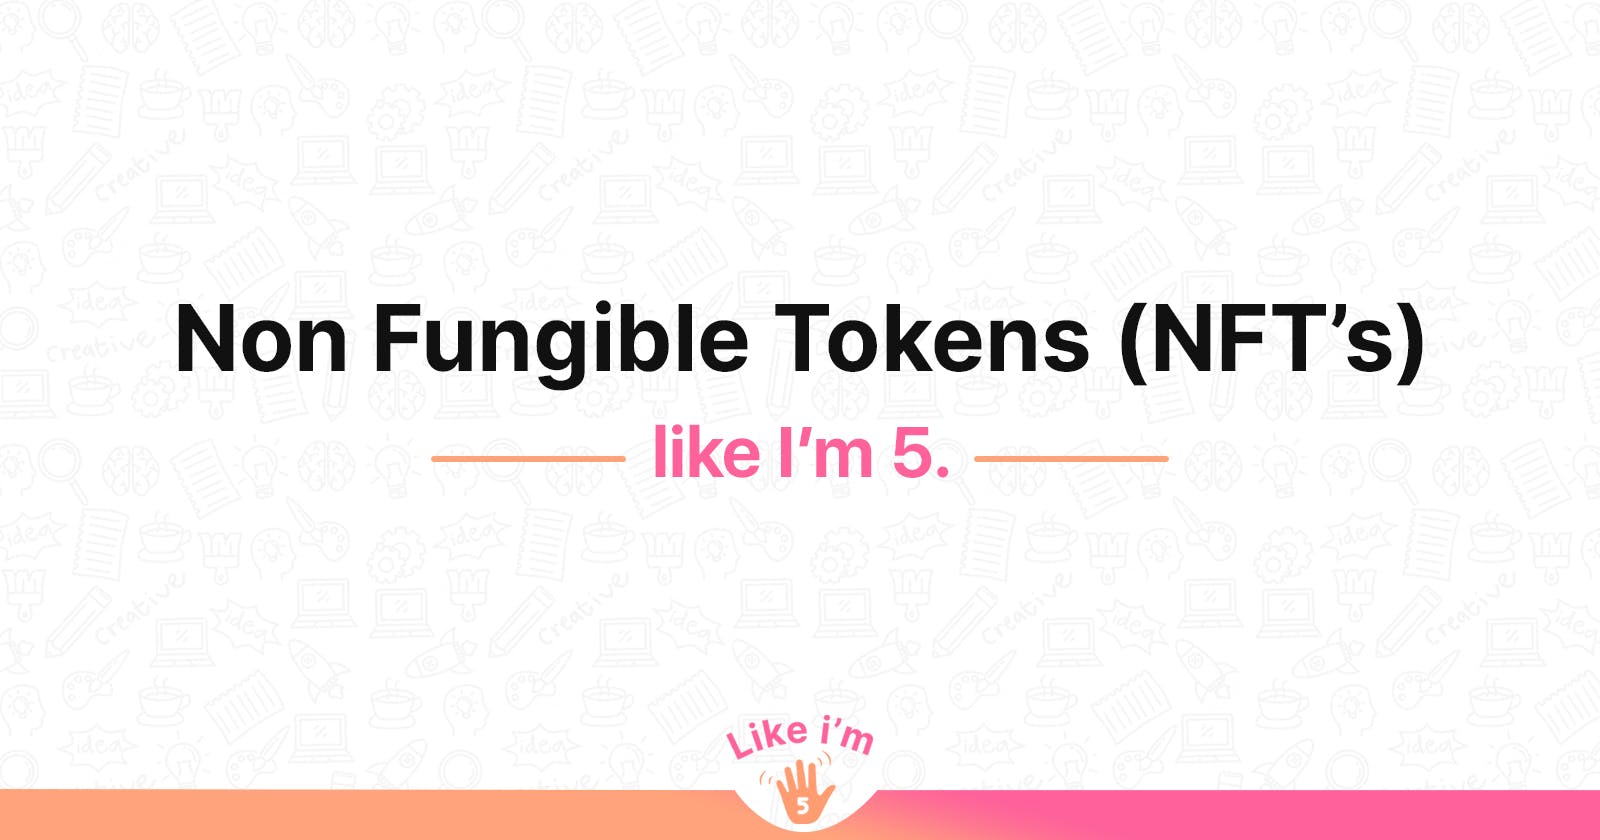 Non Fungible Tokens (NFT's)